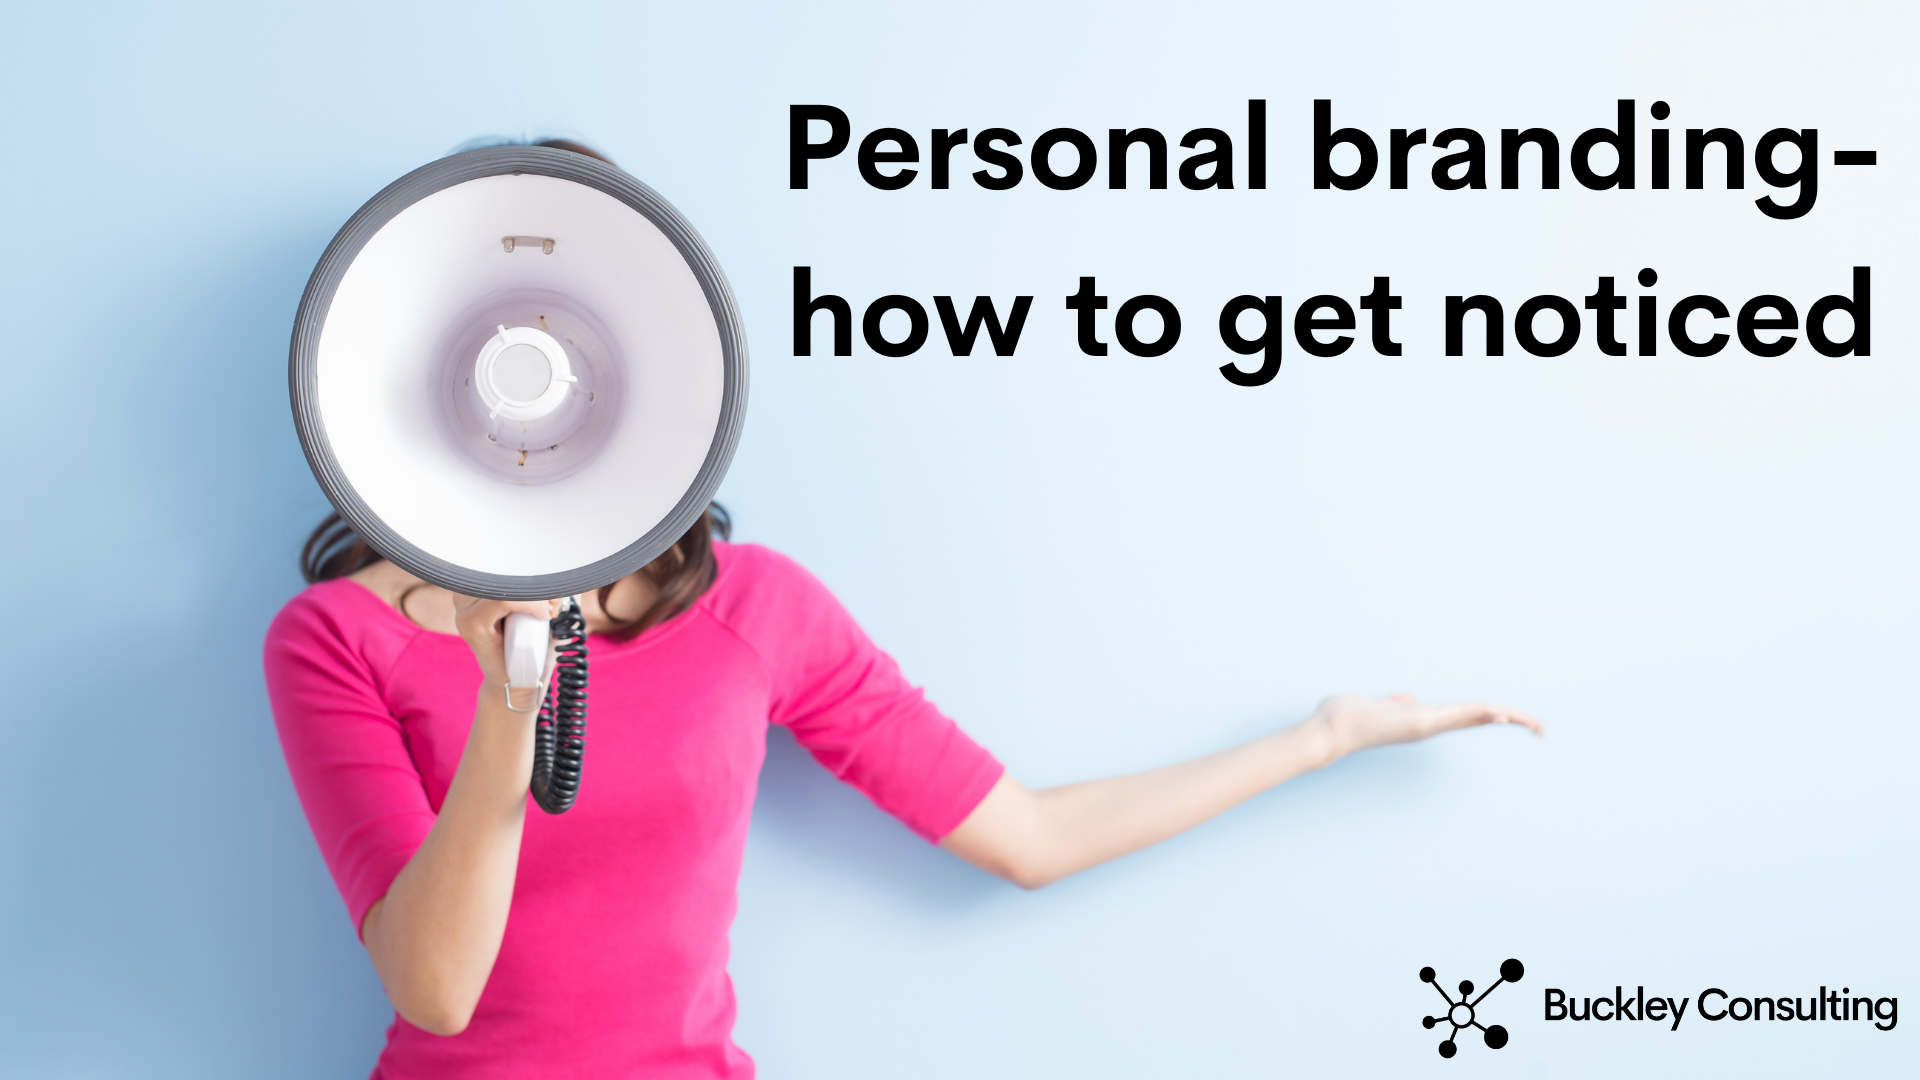 Personal branding - how to get noticed